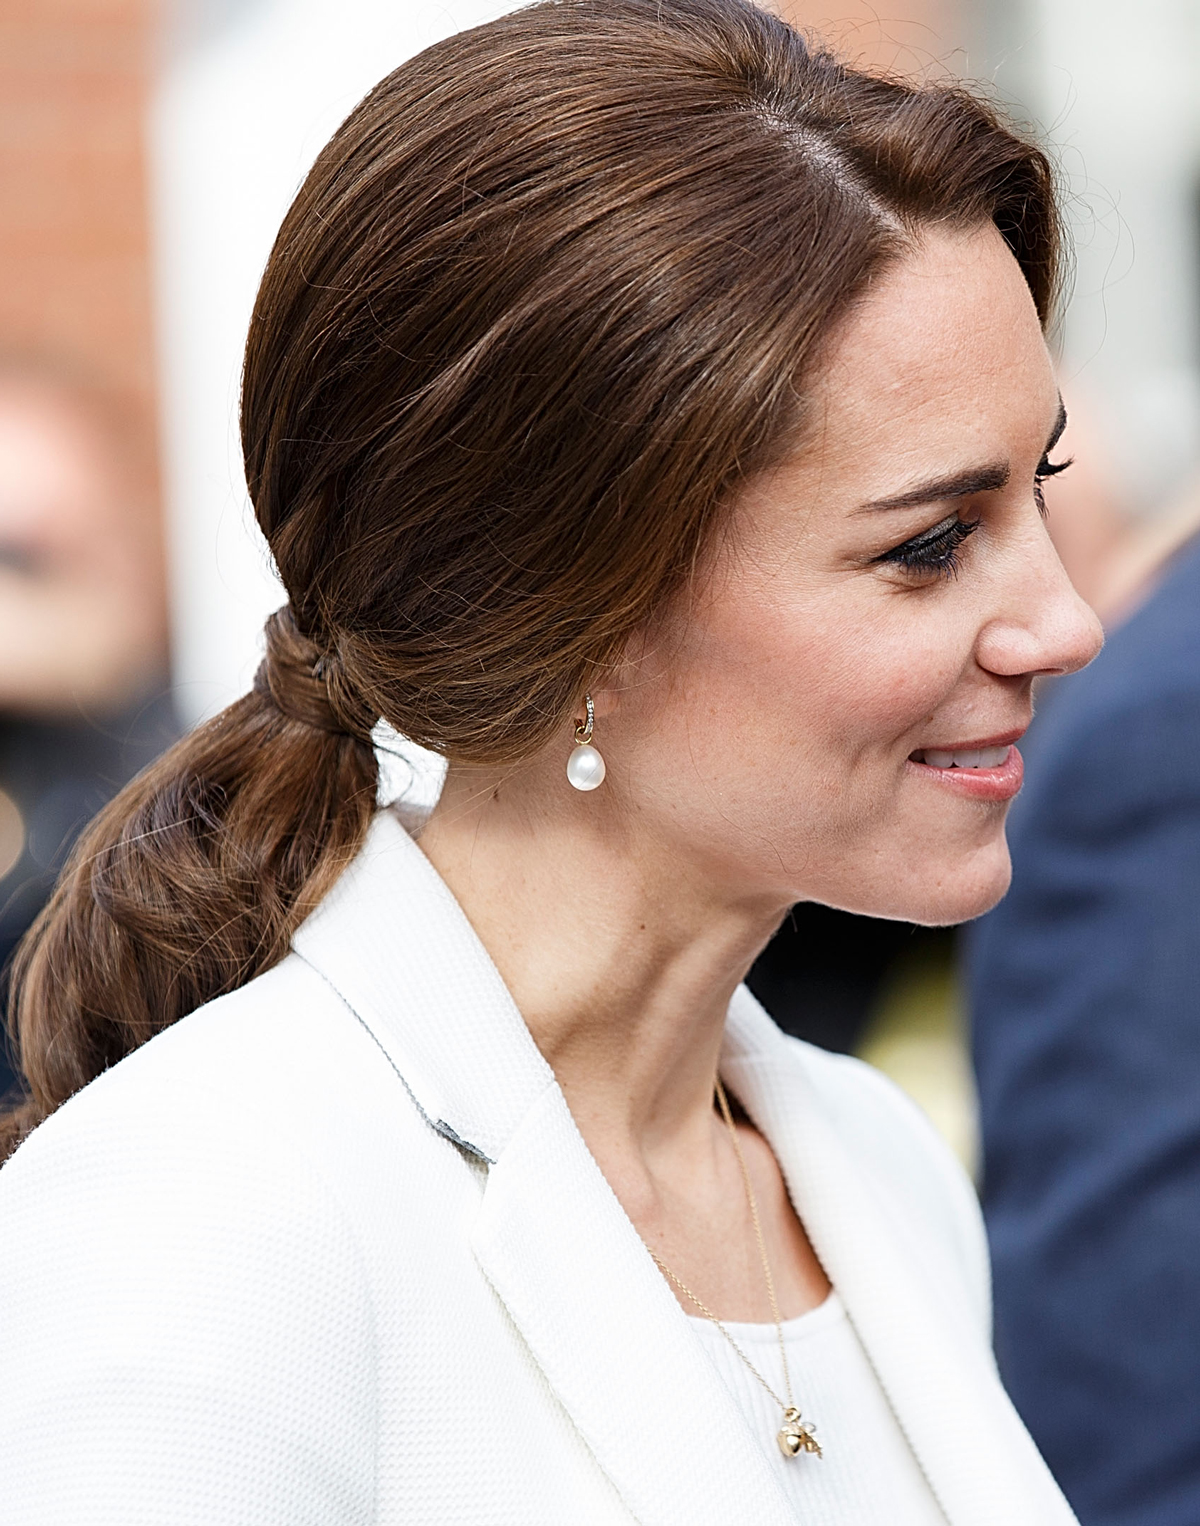 Kate Middletons earrings Amazon sells 15 dupes of royals designer pair   The Independent